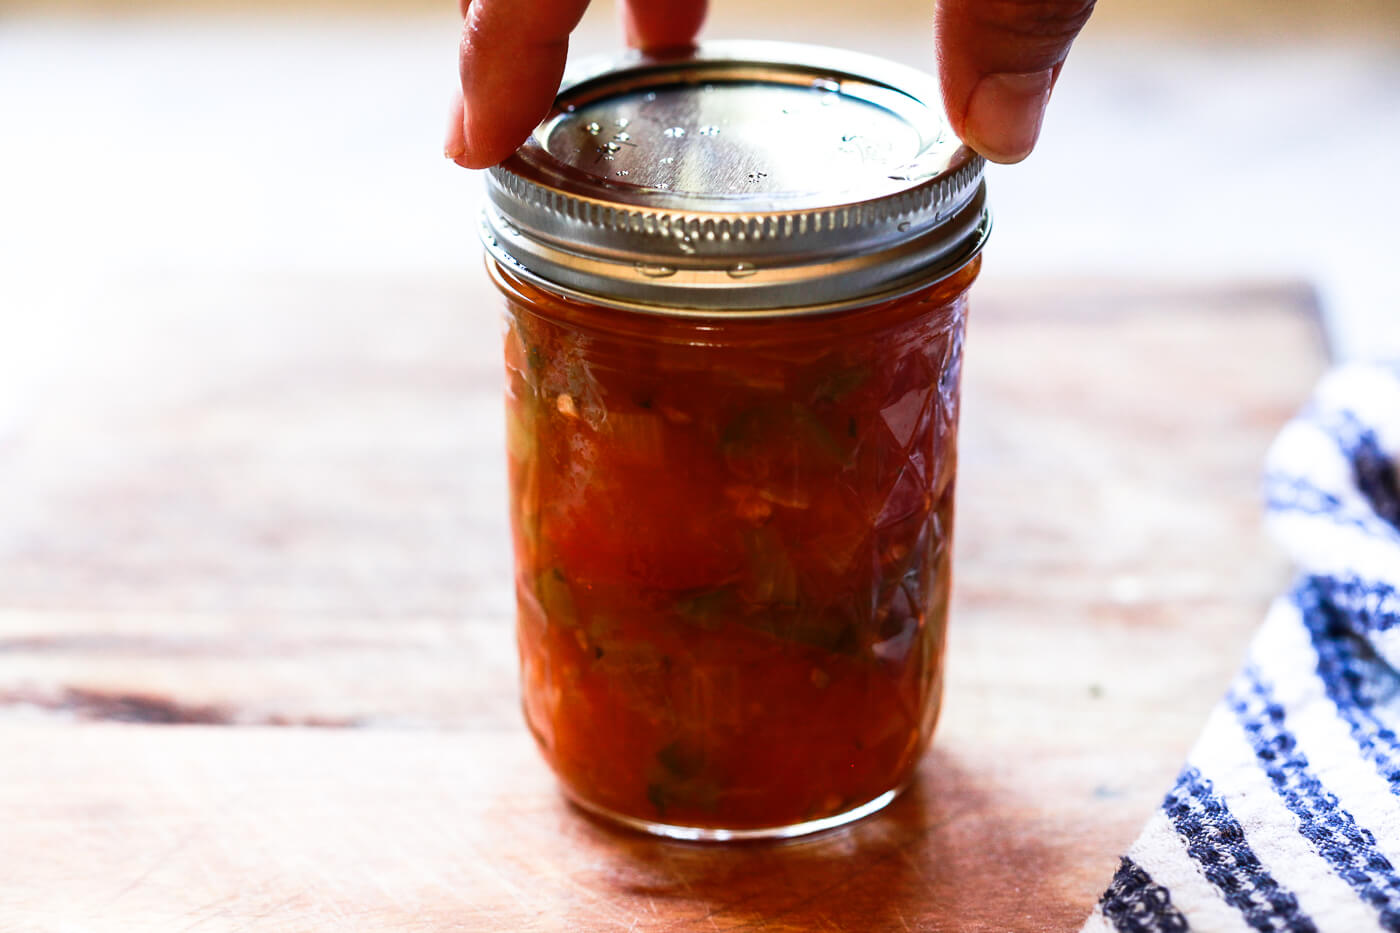 A Ball canning lid is placed on a jar of homemade salsa for canning.